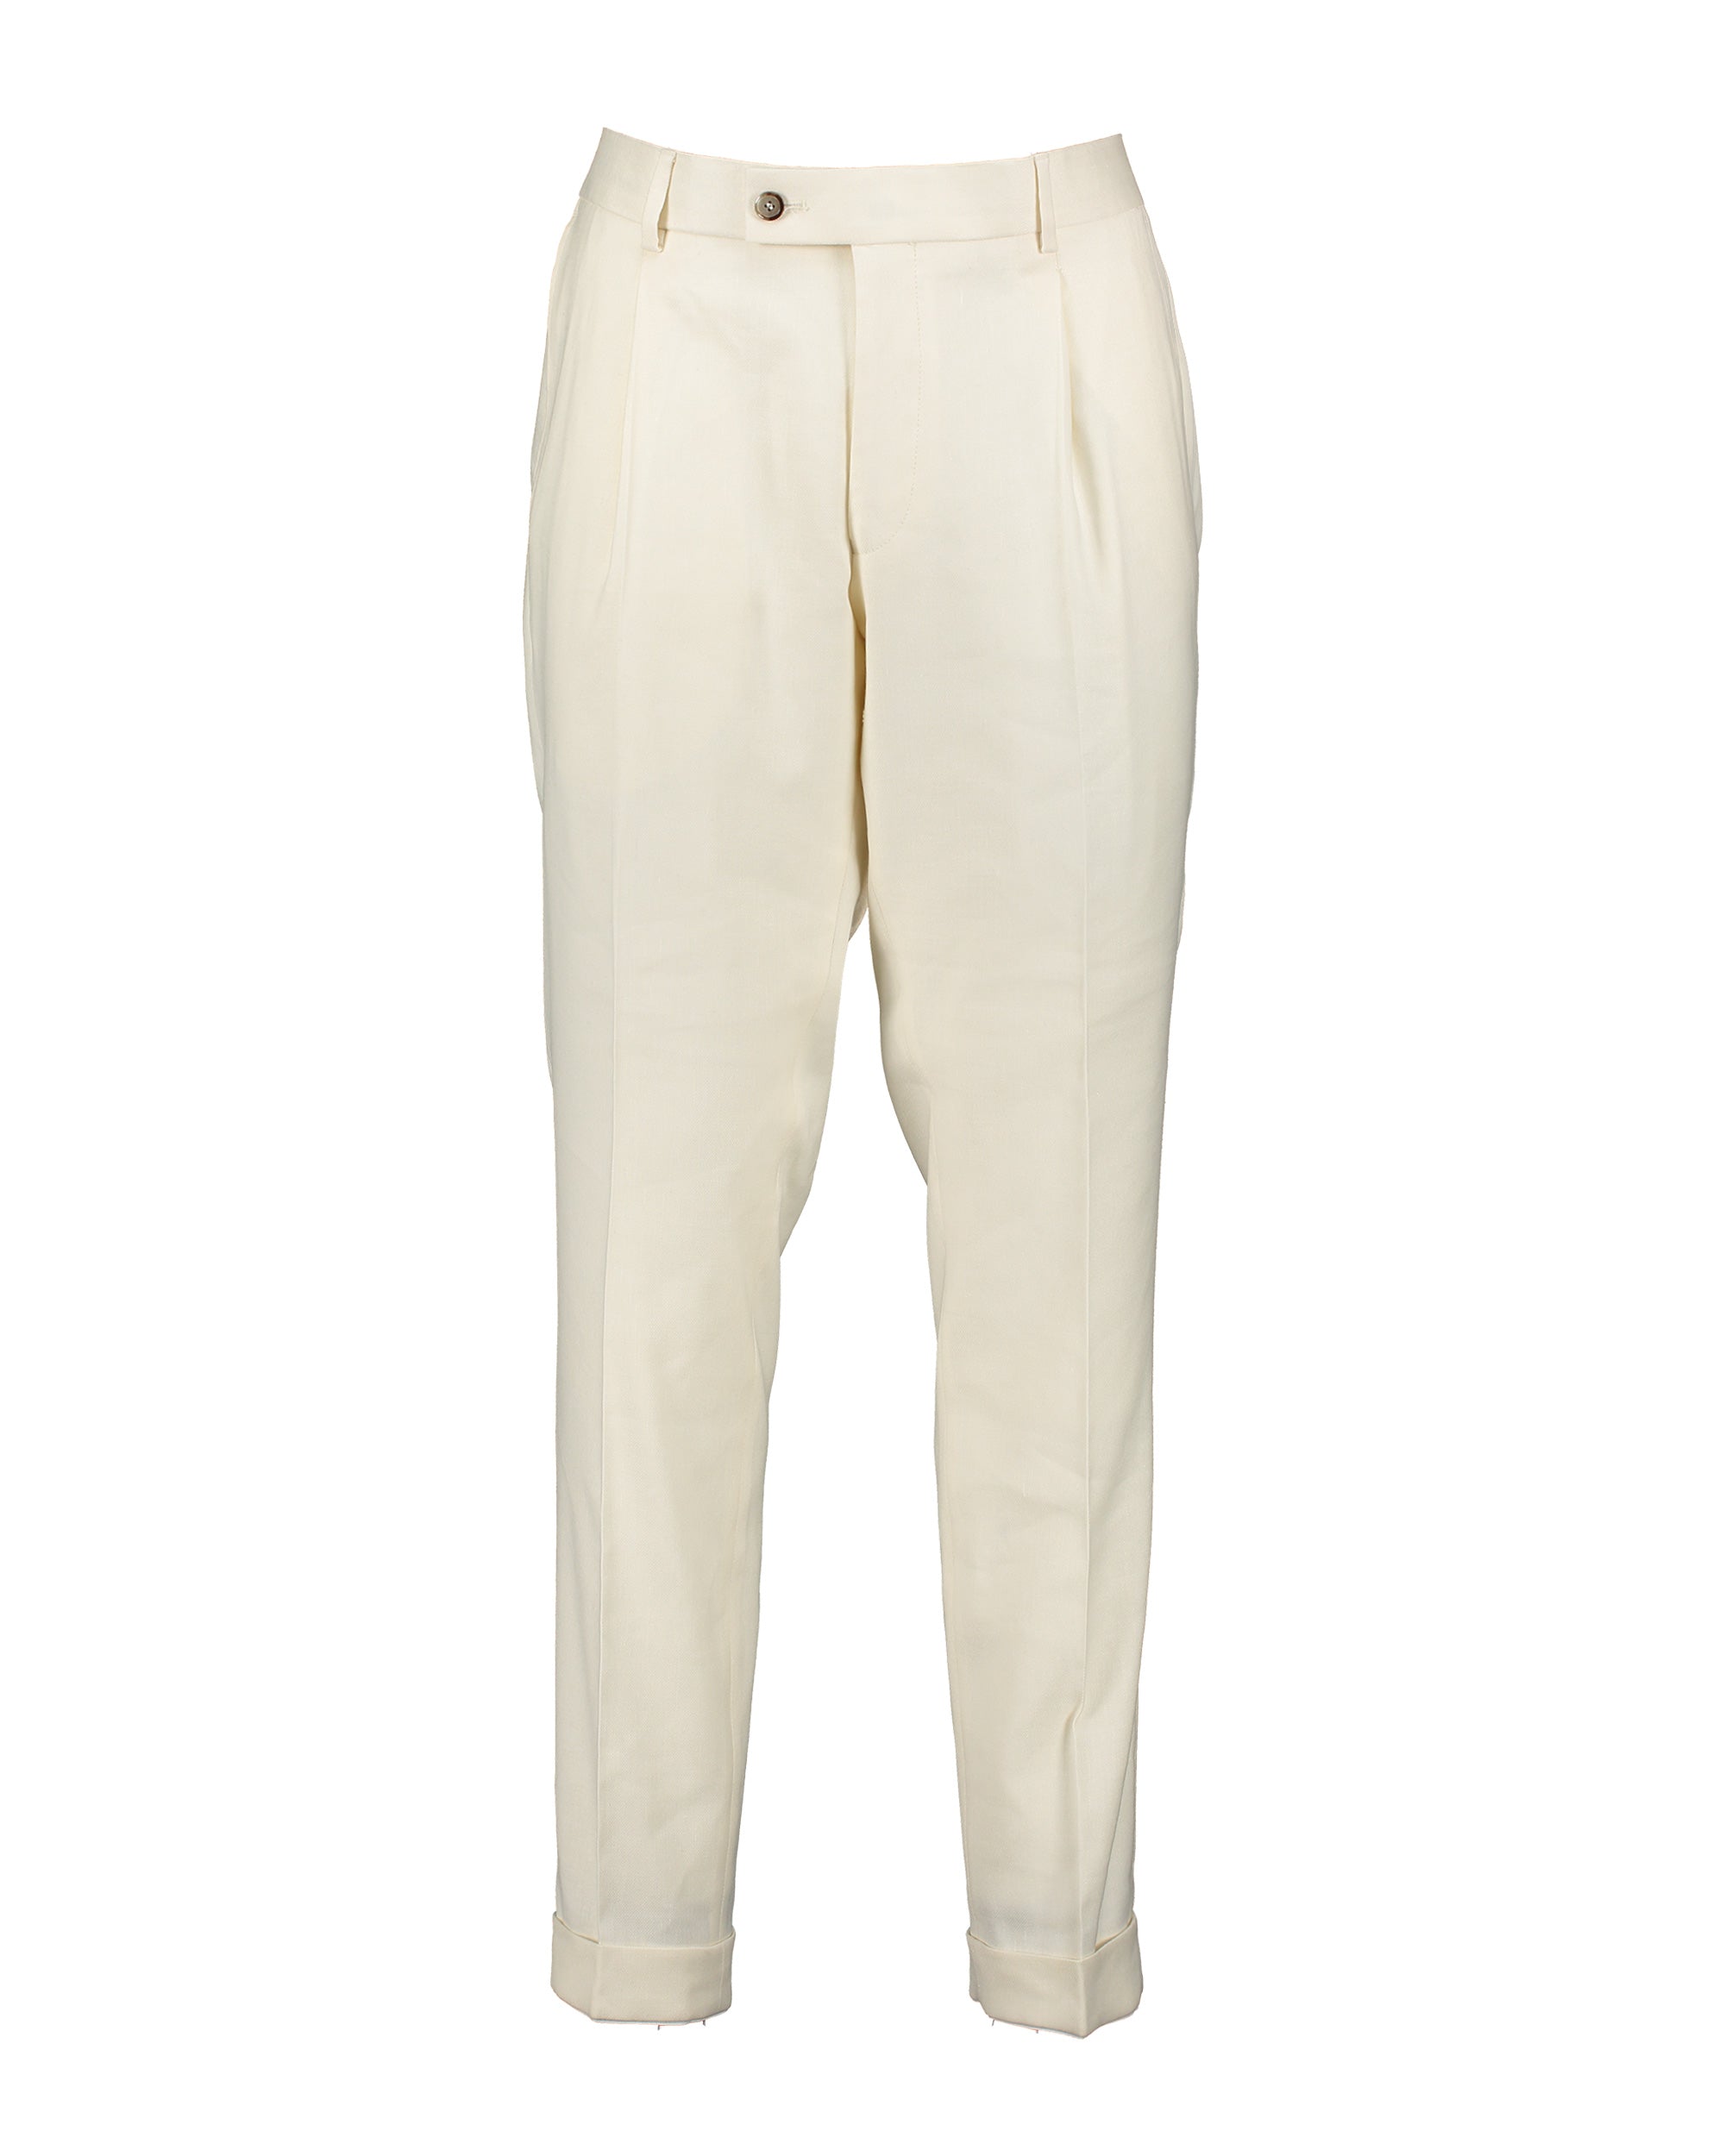 Alex Off White Linen Stretch Trousers